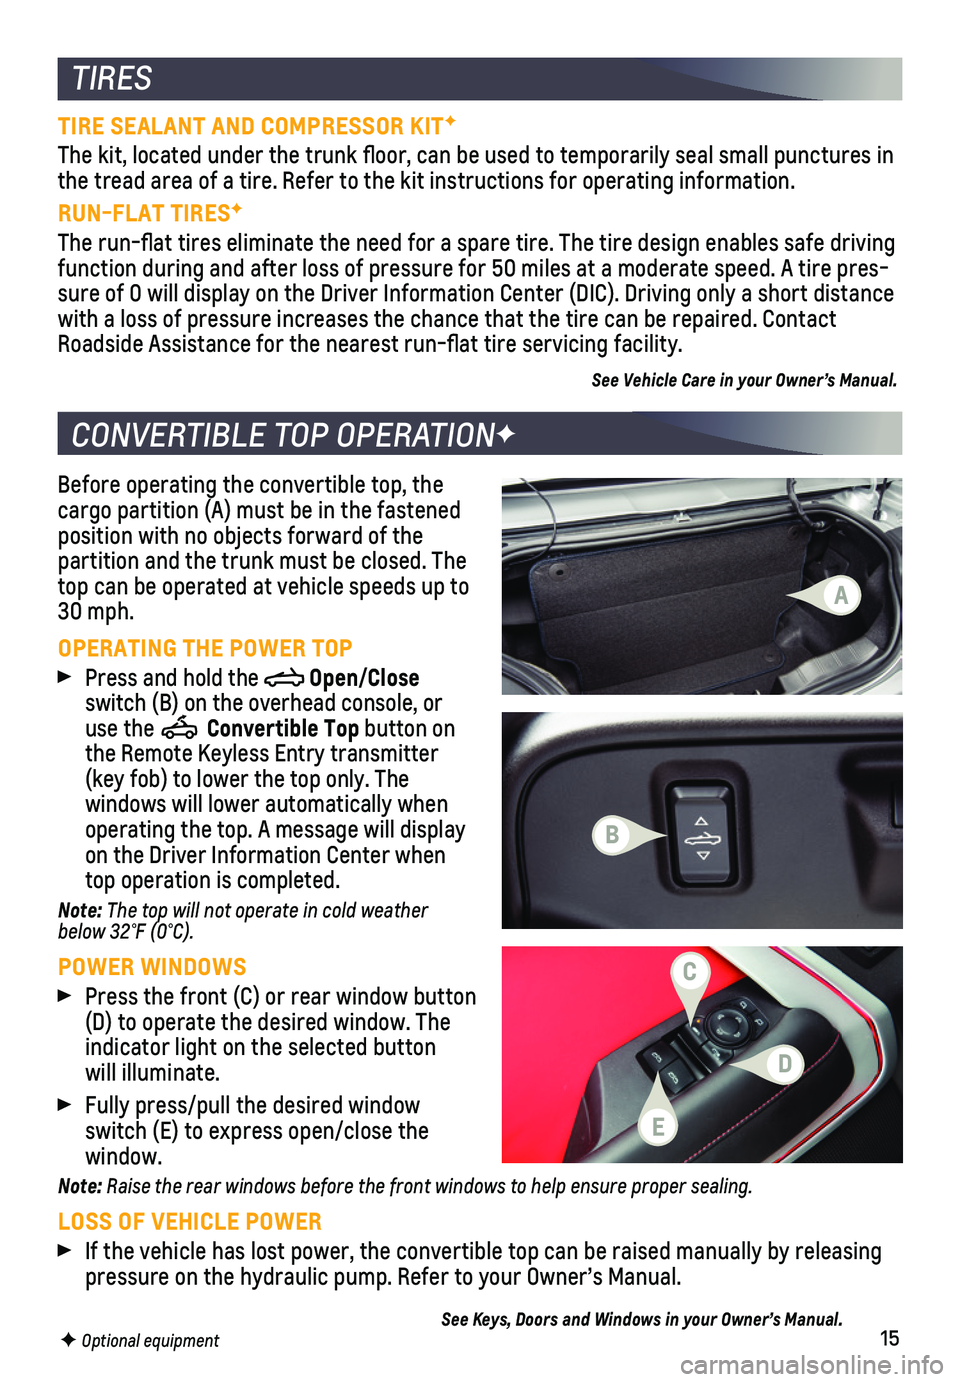 CHEVROLET CAMARO 2021  Get To Know Guide 15
Before operating the convertible top, the cargo partition (A) must be in the fastened position with no objects forward of the partition and the trunk must be closed. The top can be operated at vehi